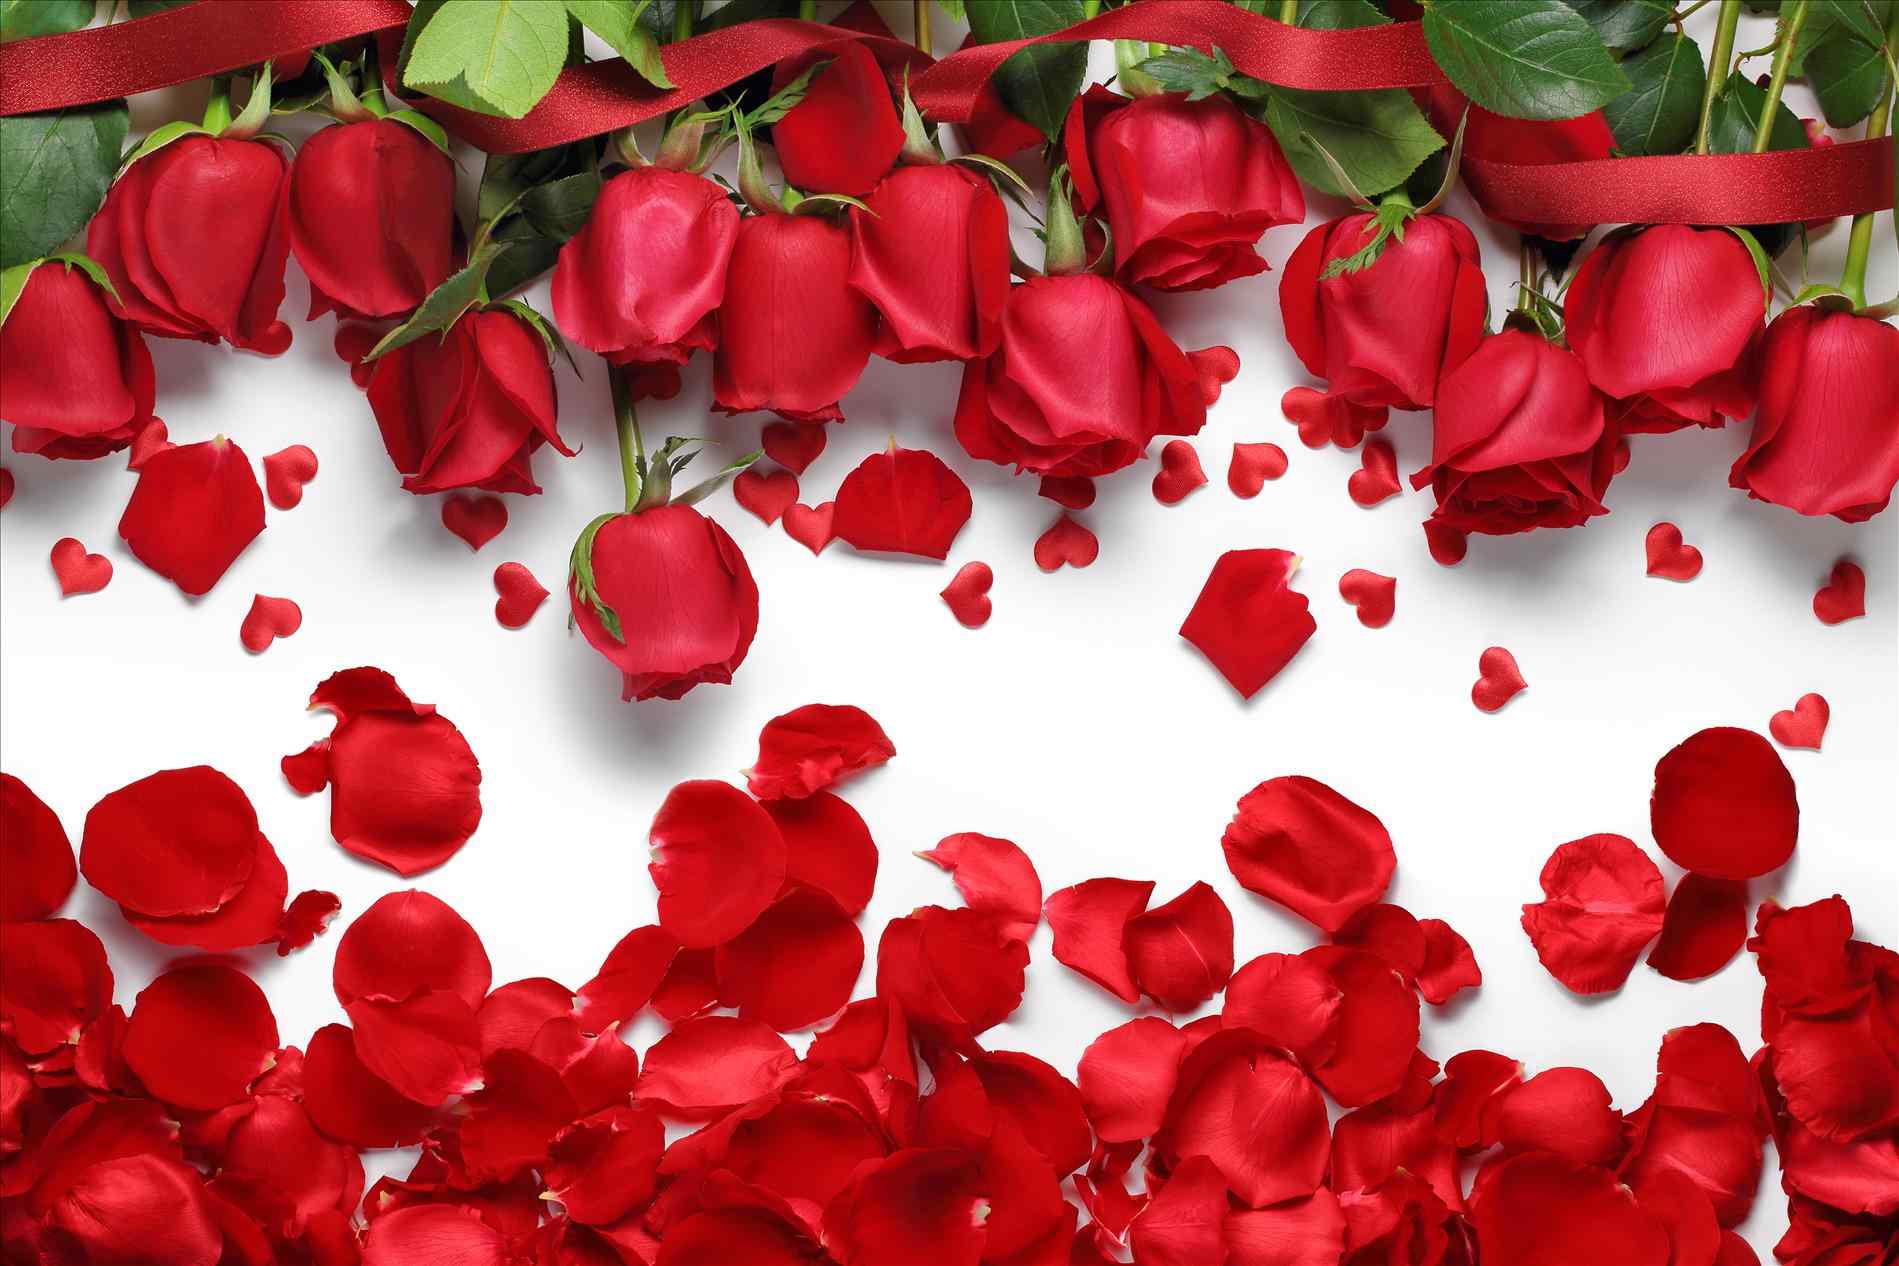 Wallpaper Rose White Background Of Red Roses Petals And Photo With